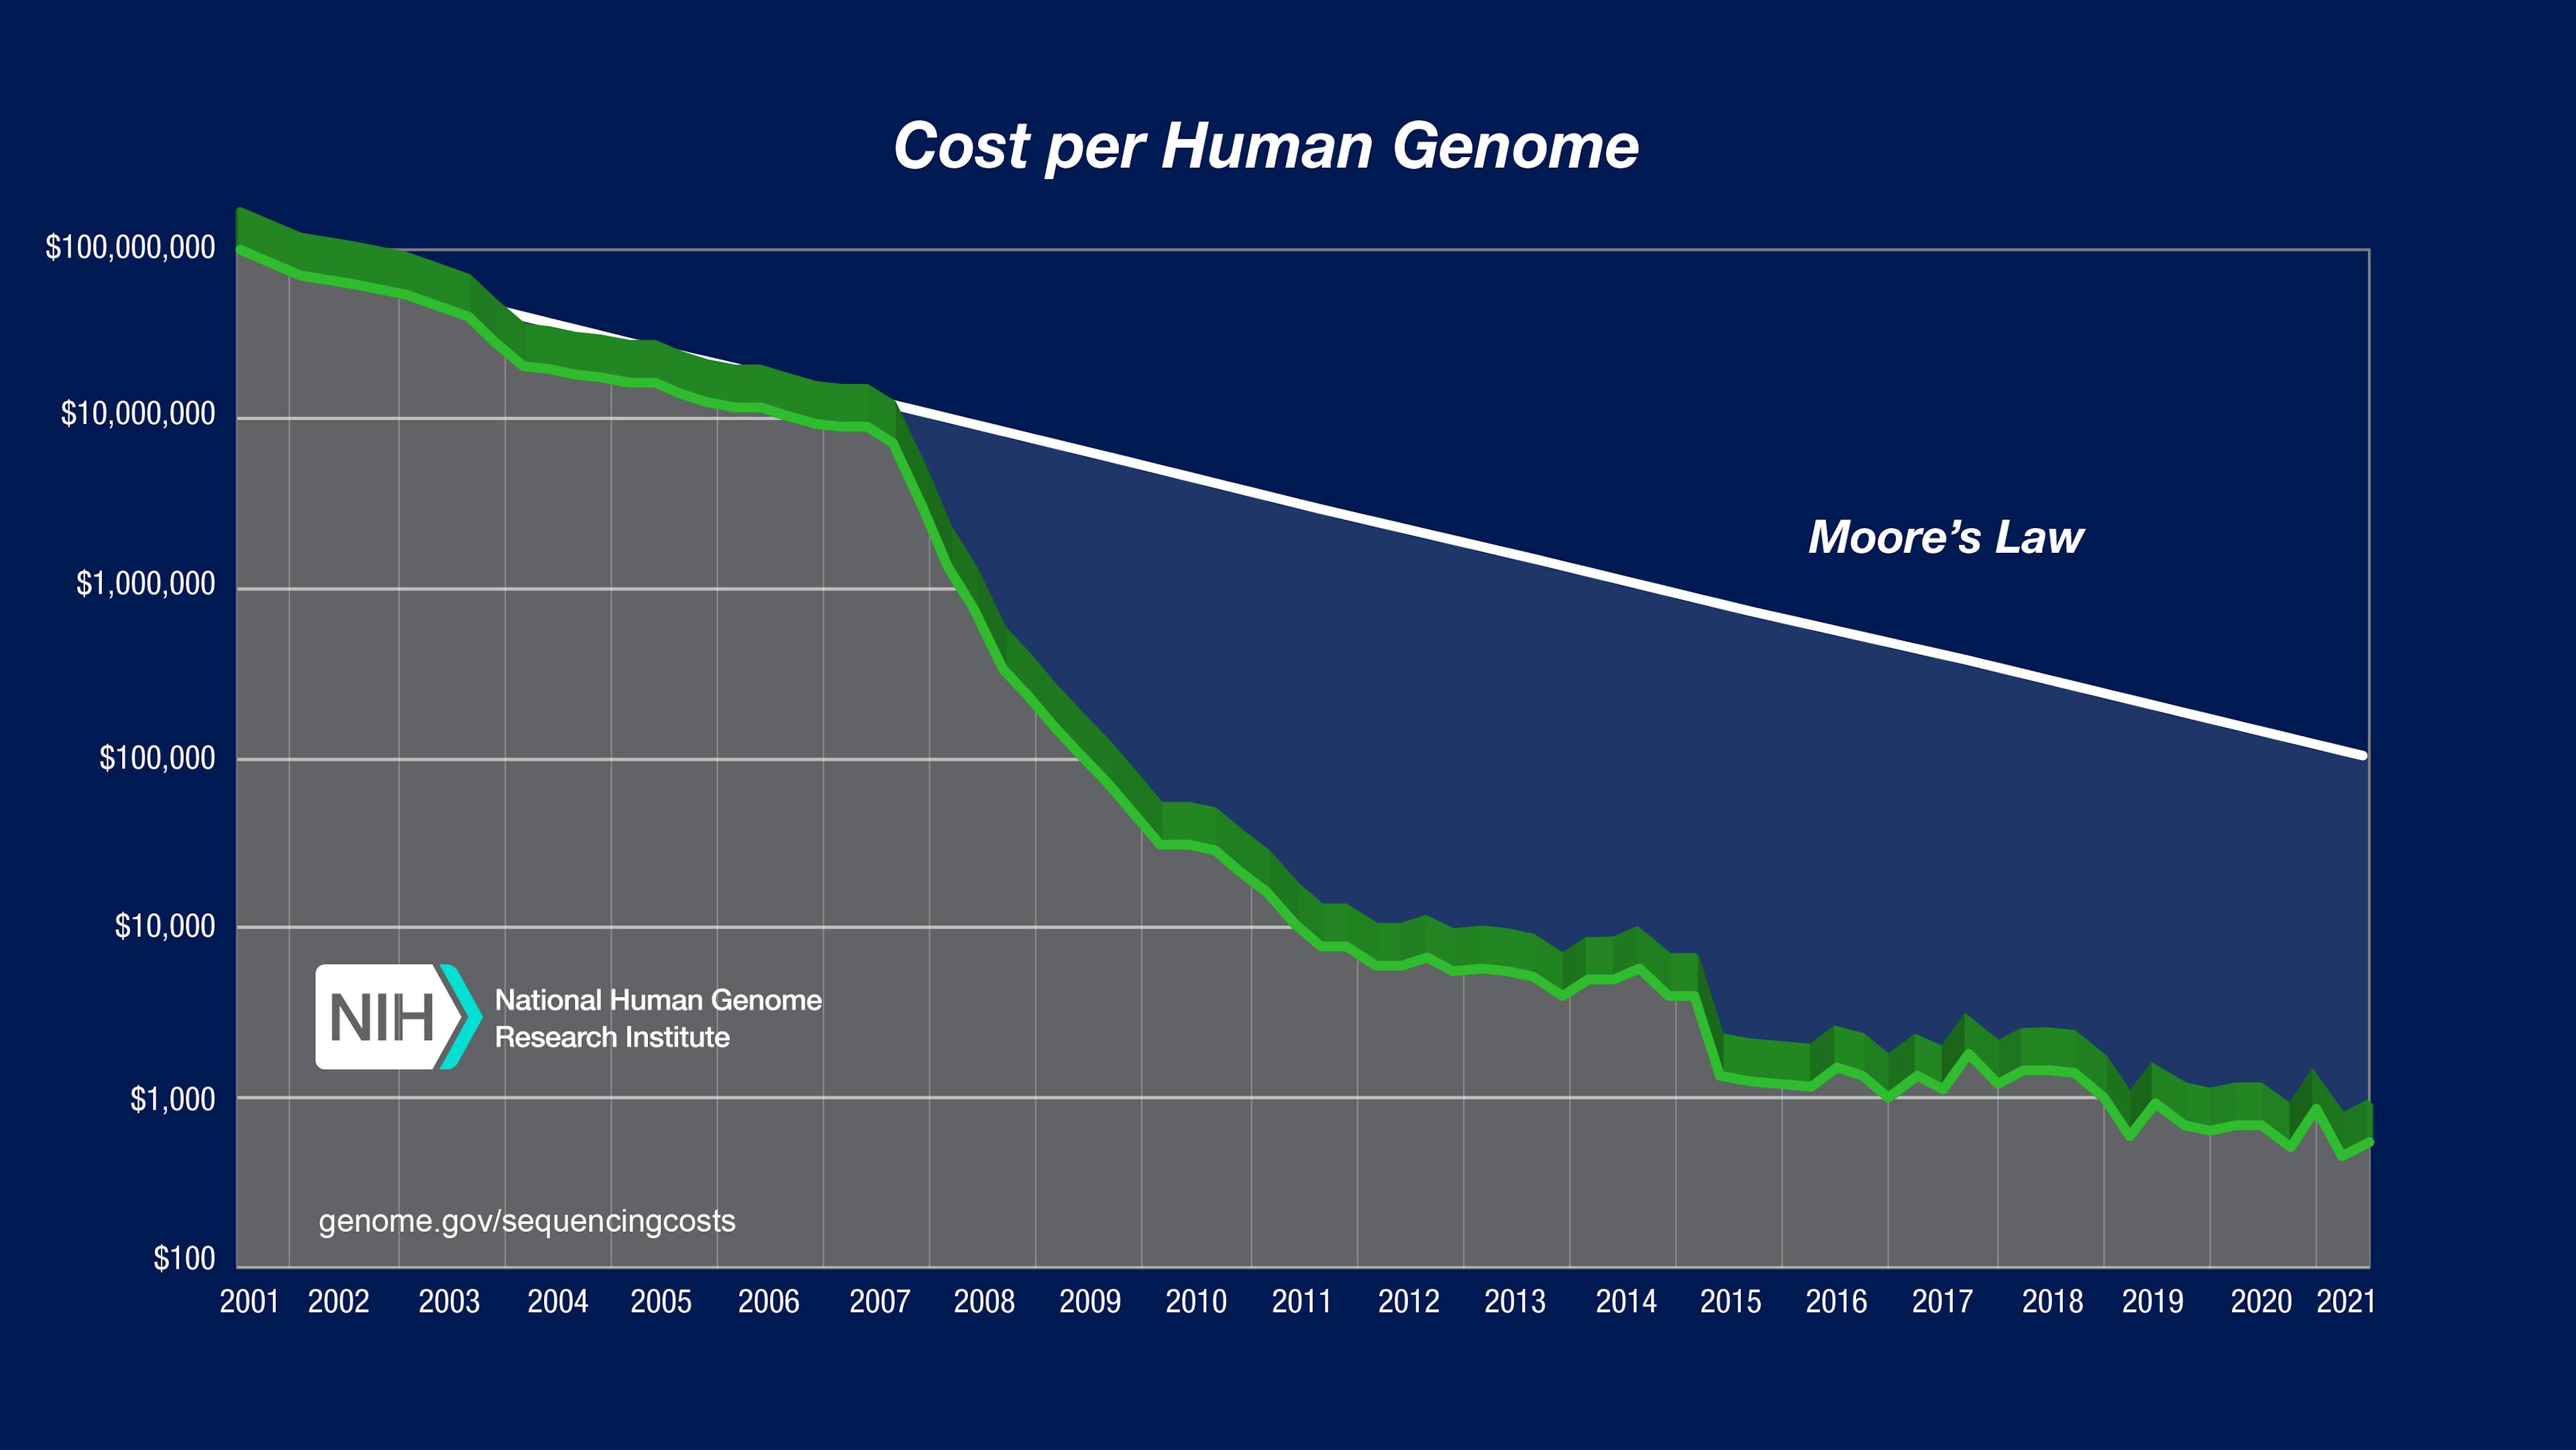 Genetic tests are outpacing Moore's Law - NIH